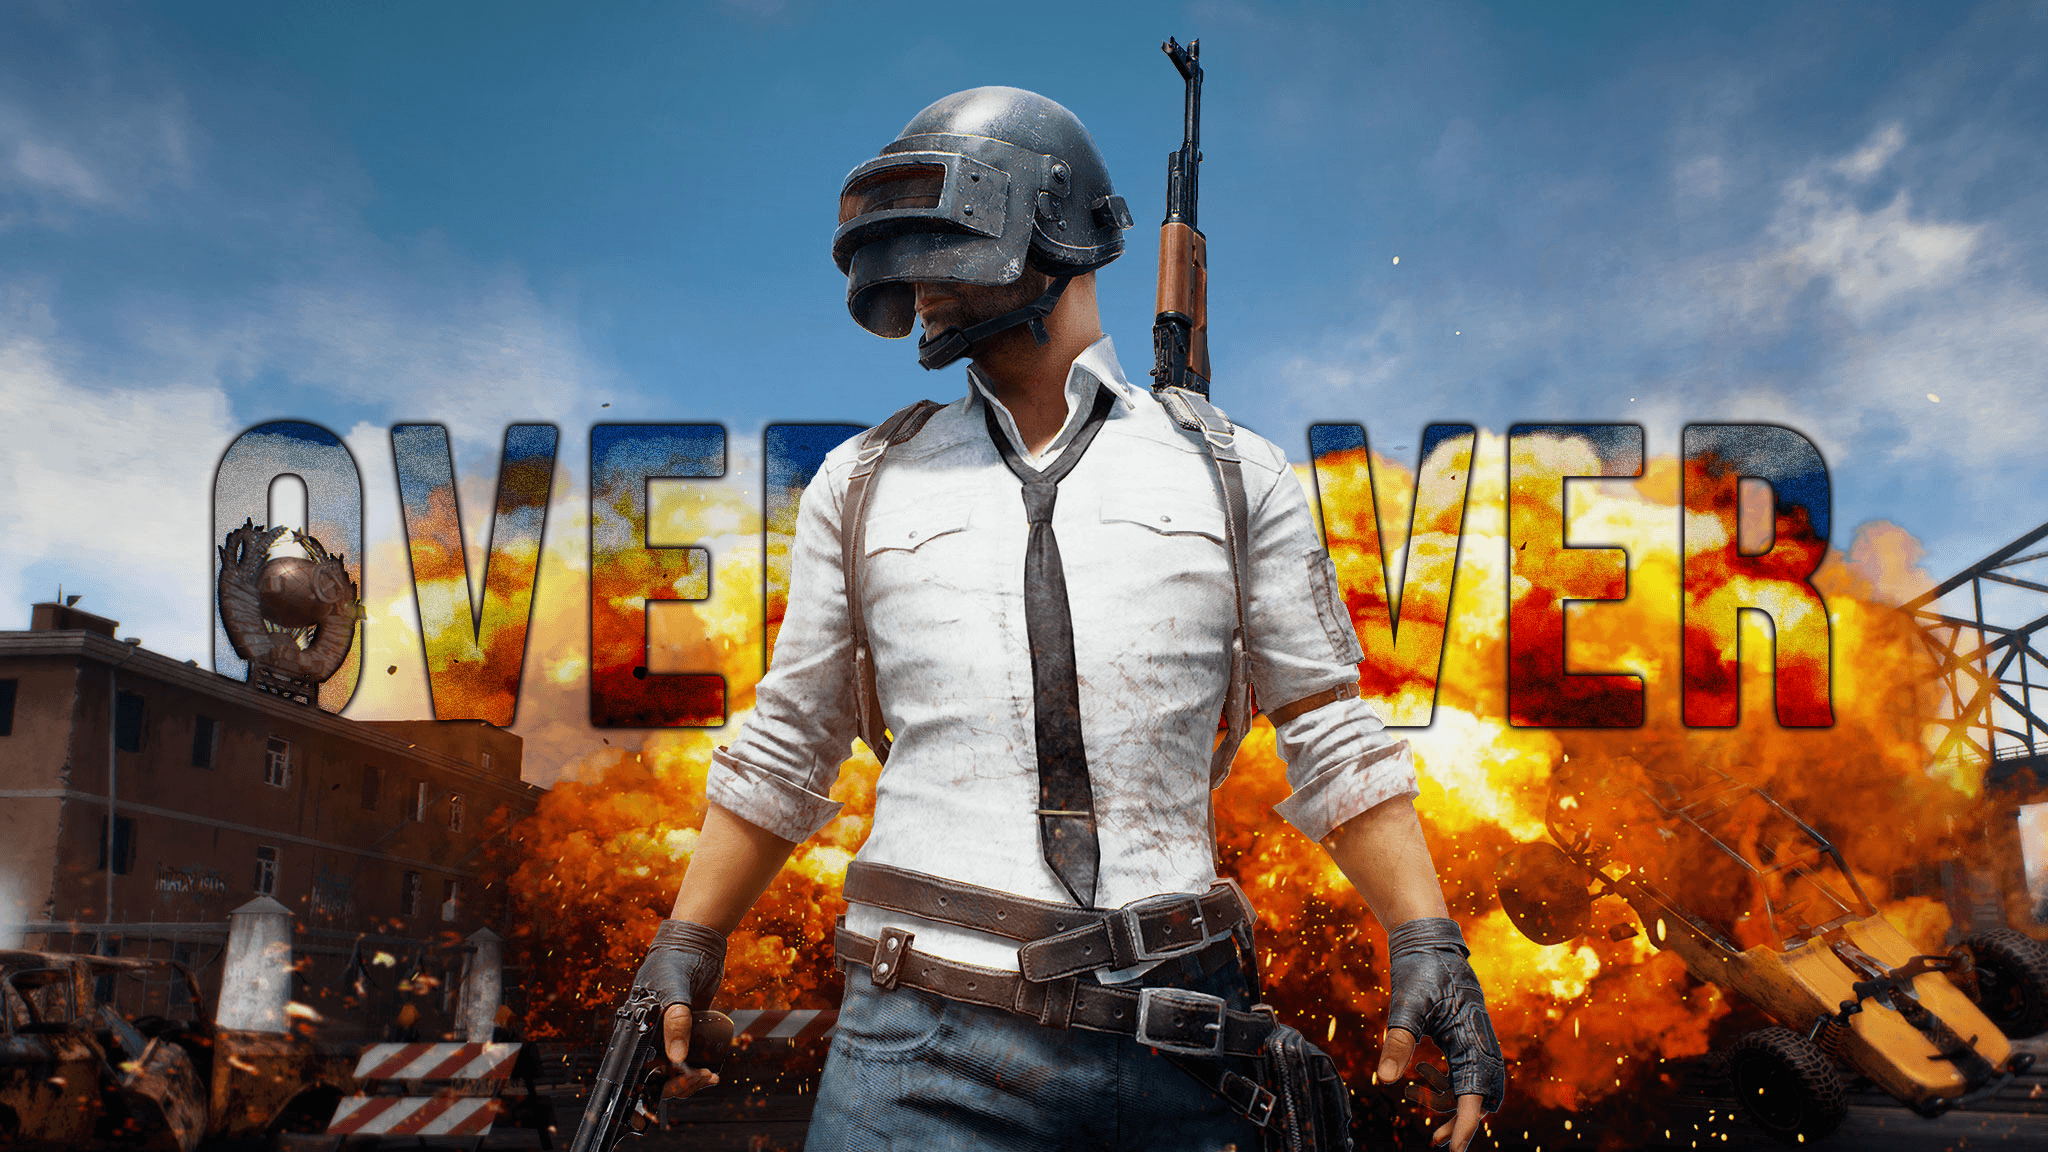 Pubg Mobile Game Wallpapers And Hd Images Trending Wallpaper Pubg